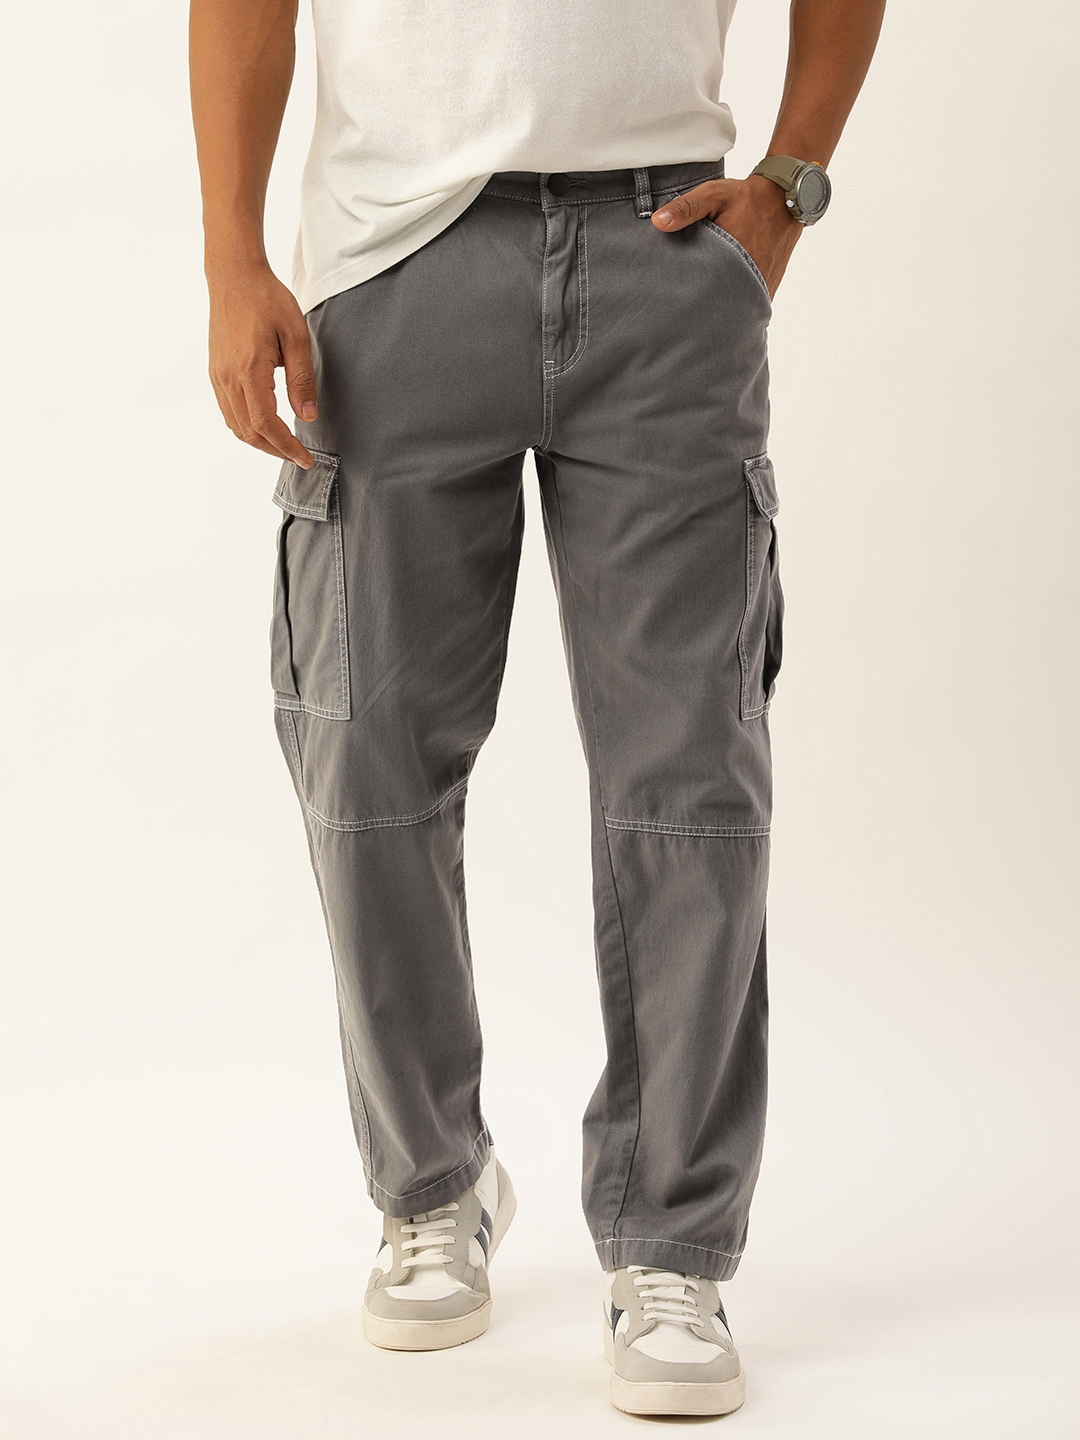 Loose fit cargo pants with 20% discount!